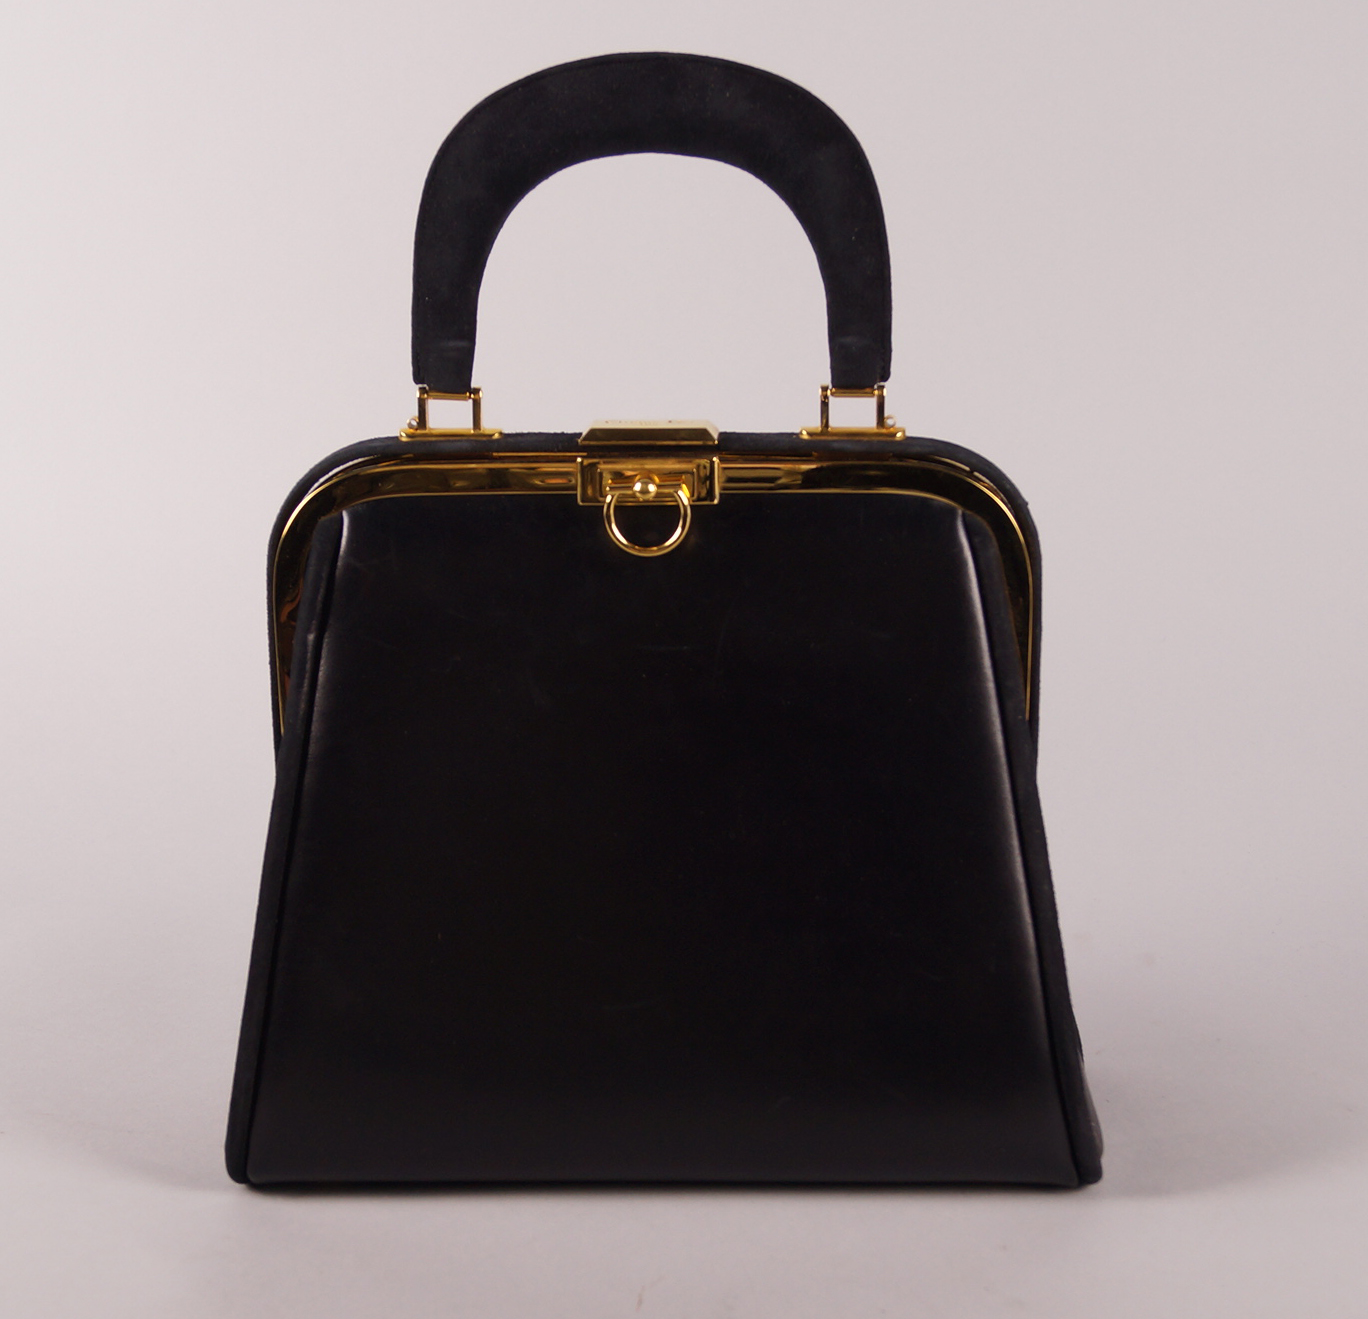 A Christian Dior black leather and suede handbag, single rigid handle and gold plated hardware,